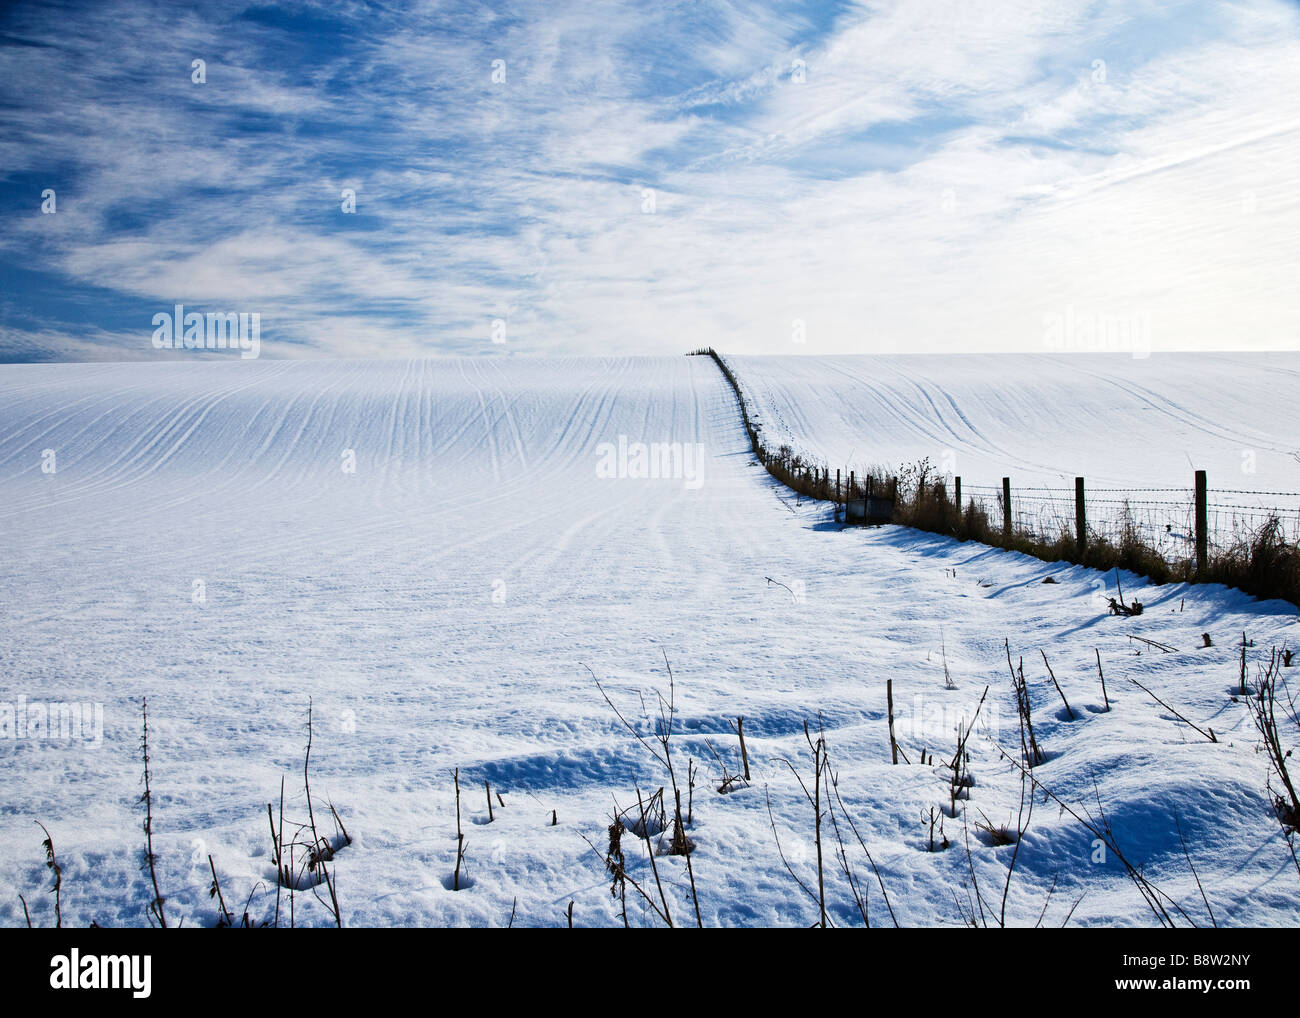 A sunny snowy winter landscape view or scene showing a snow covered field and cirrus cloud formation in a blue sky Stock Photo